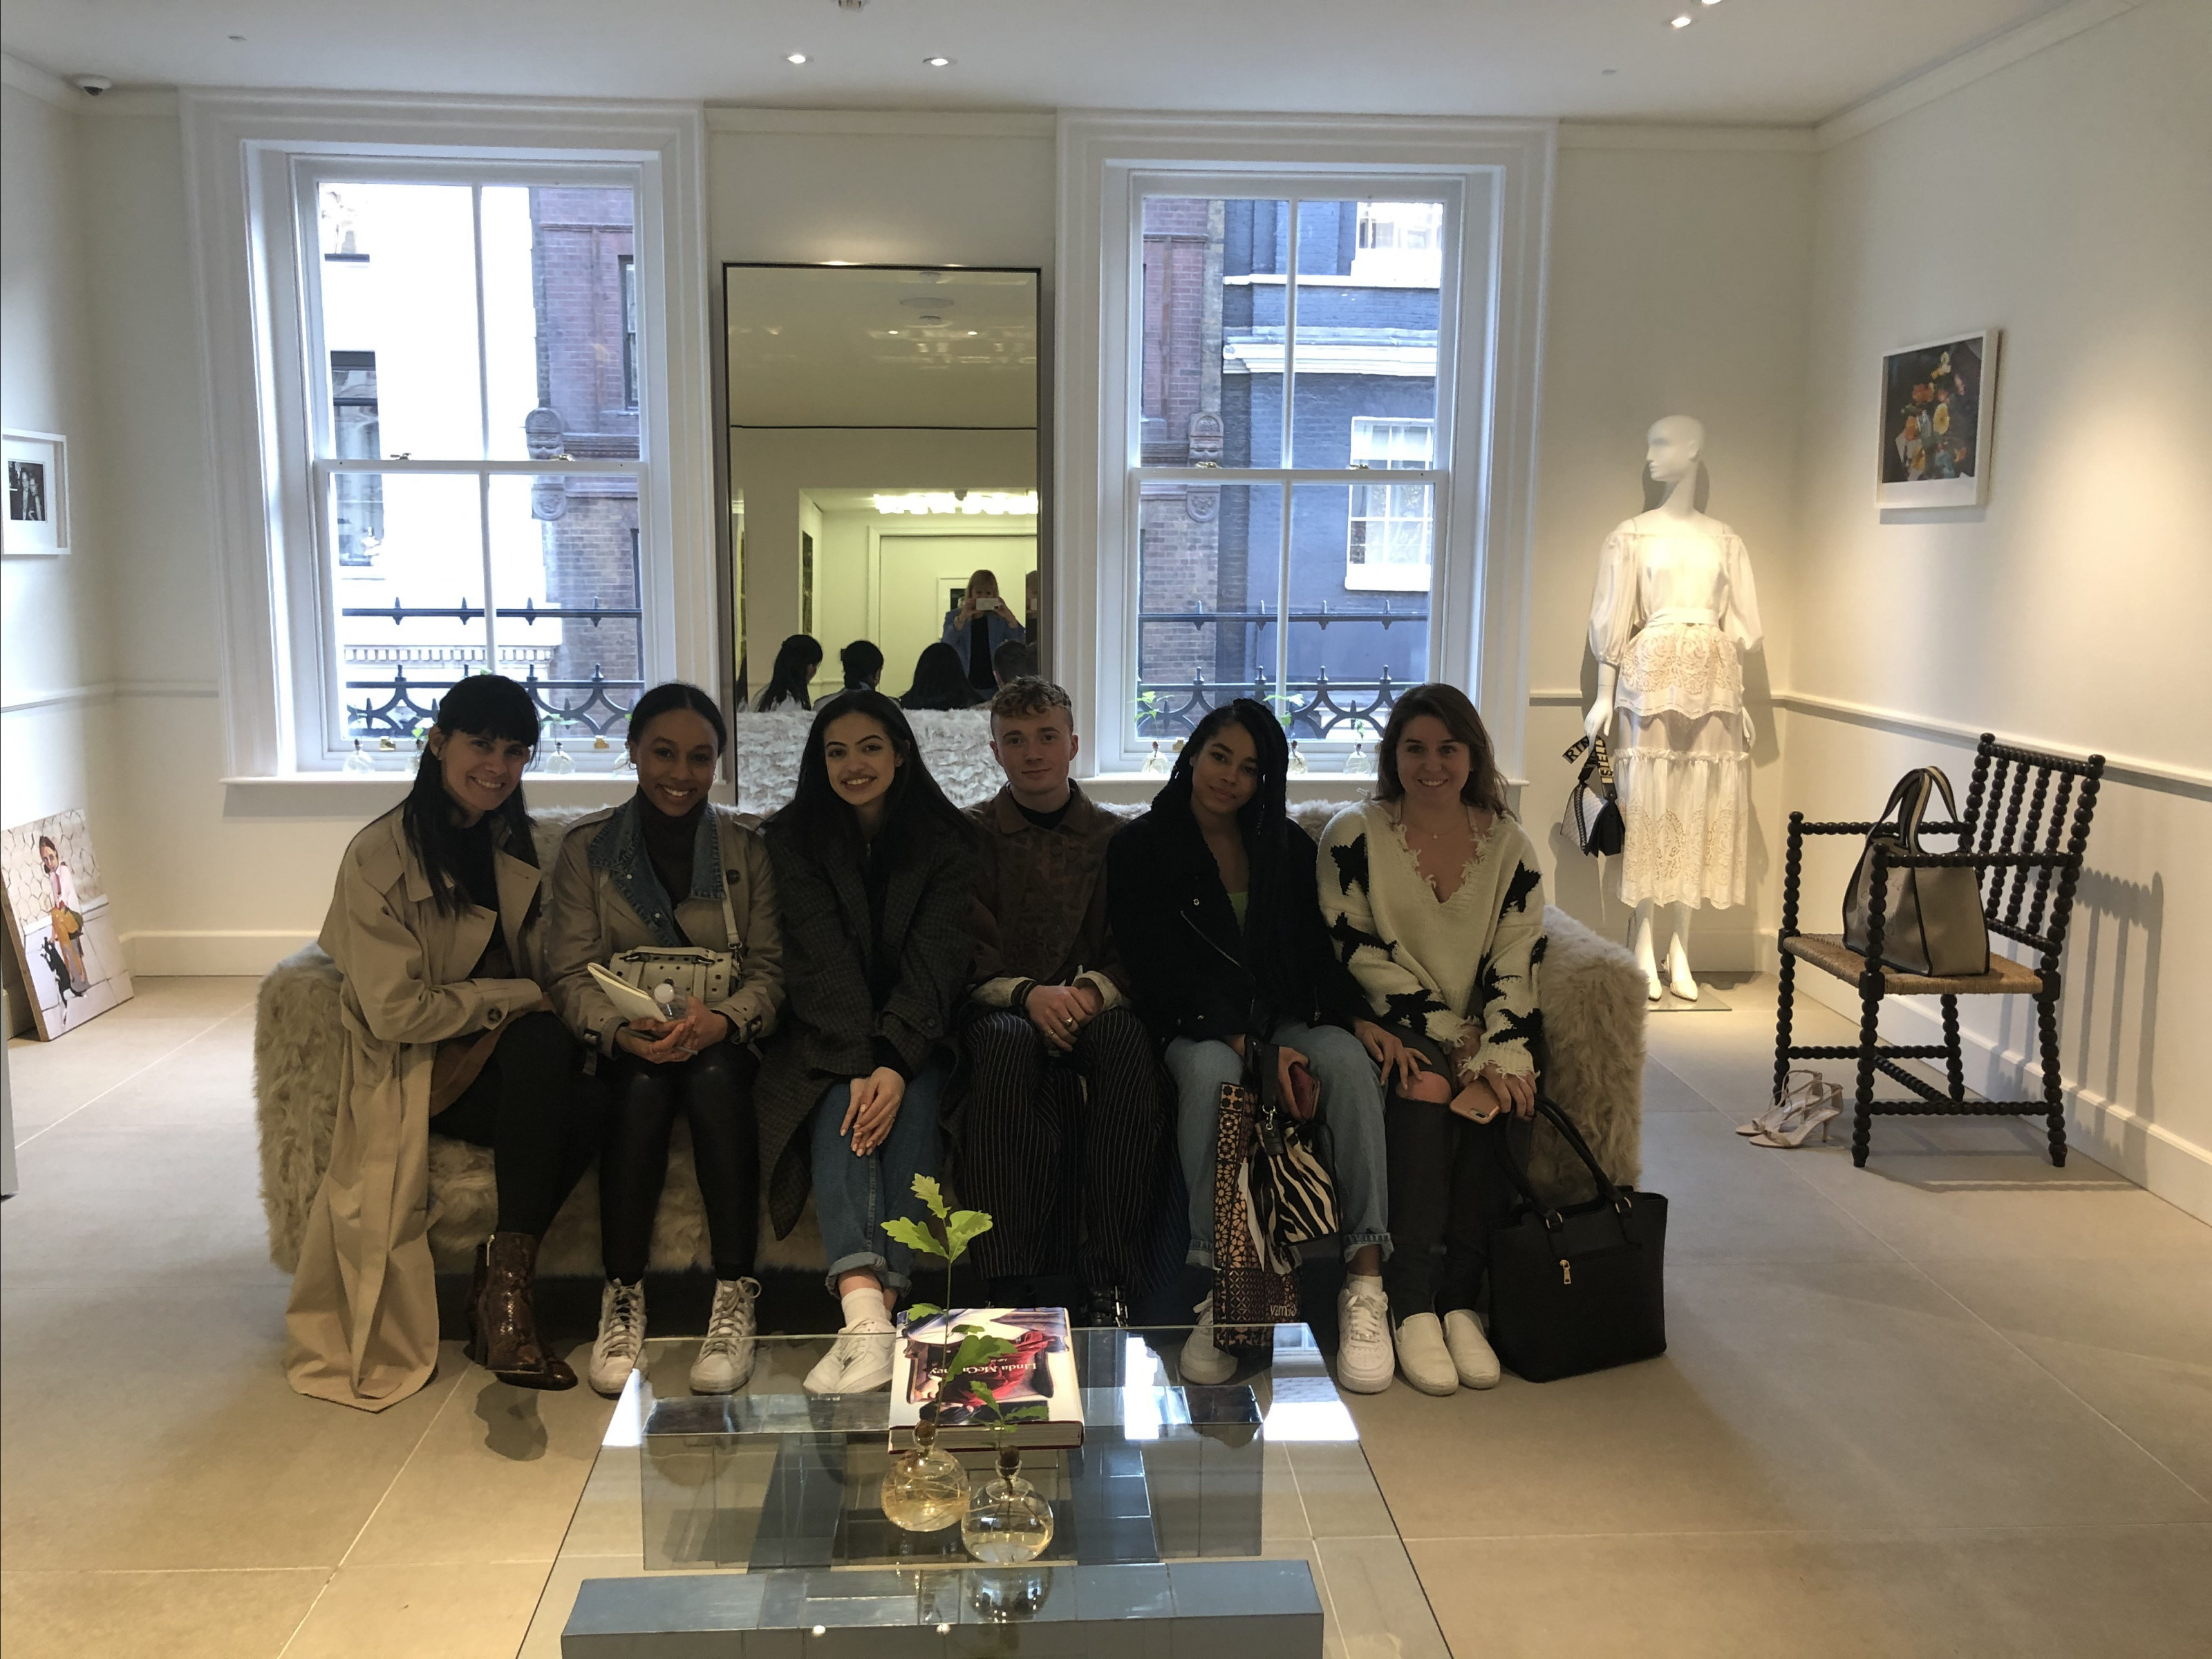 Global Fashion Business: London and Paris (Faculty-Led Travel Course)